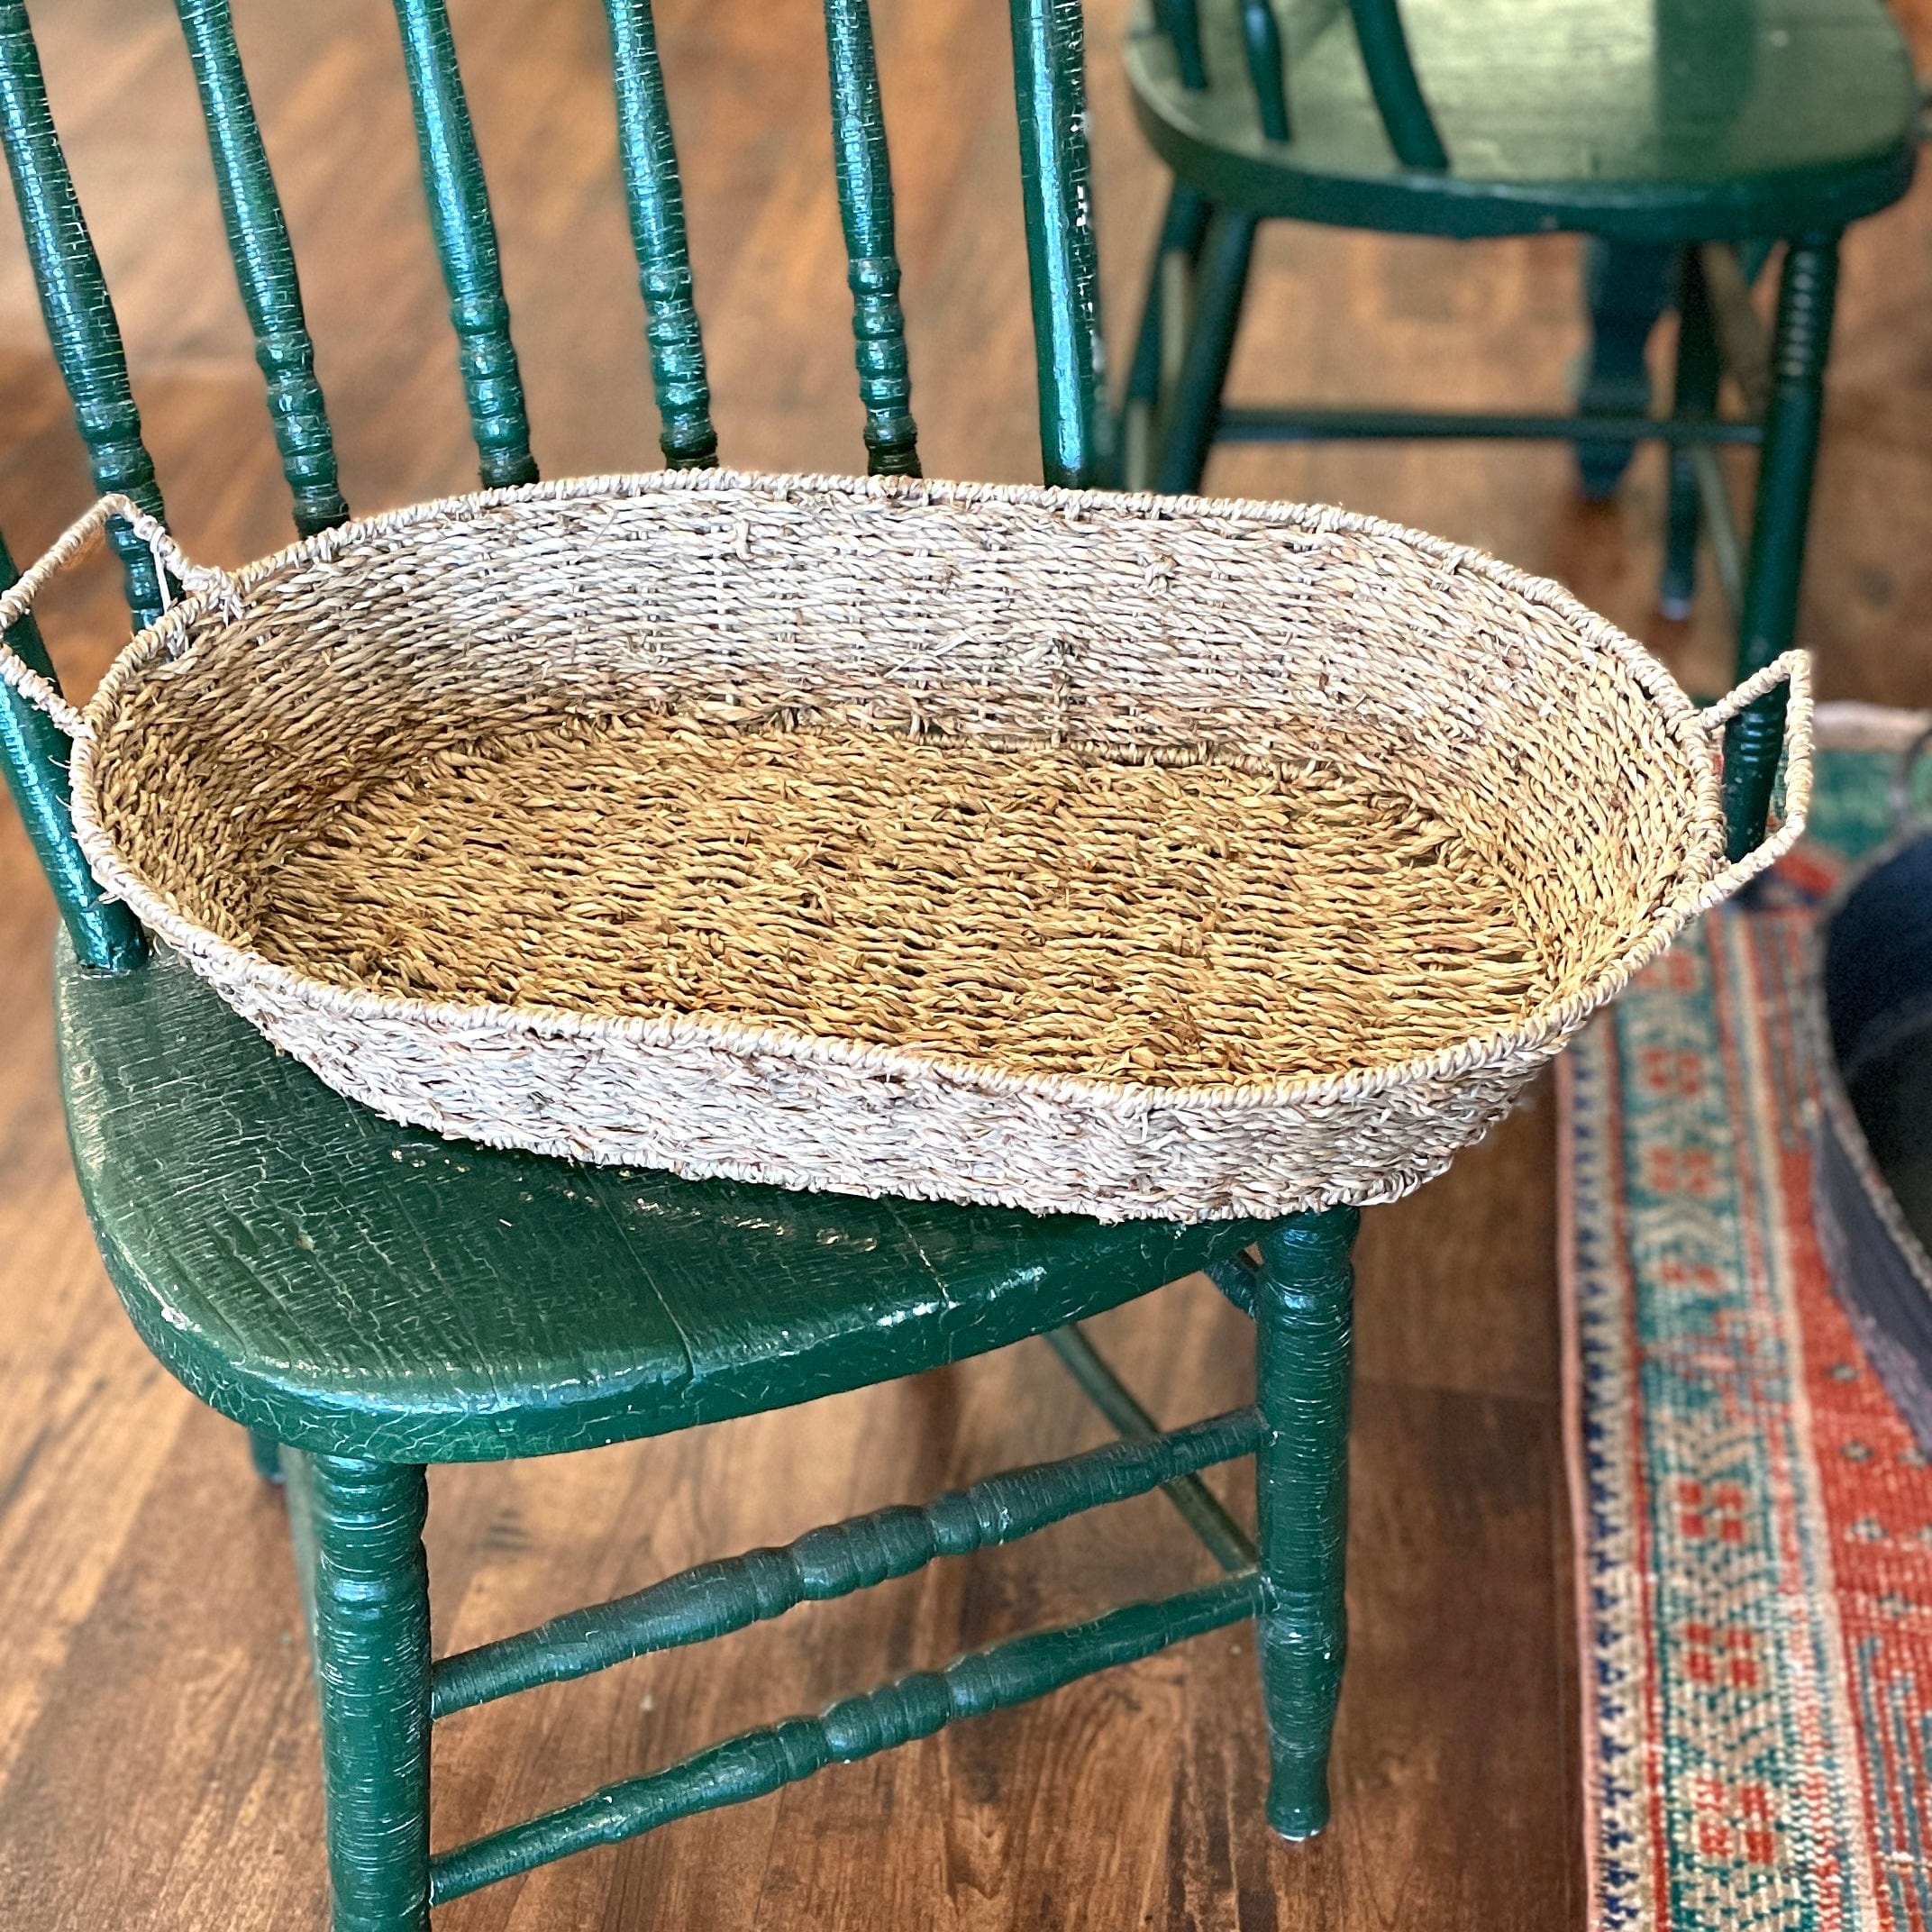 Handwoven Seagrass Tray with Handles - PORCH